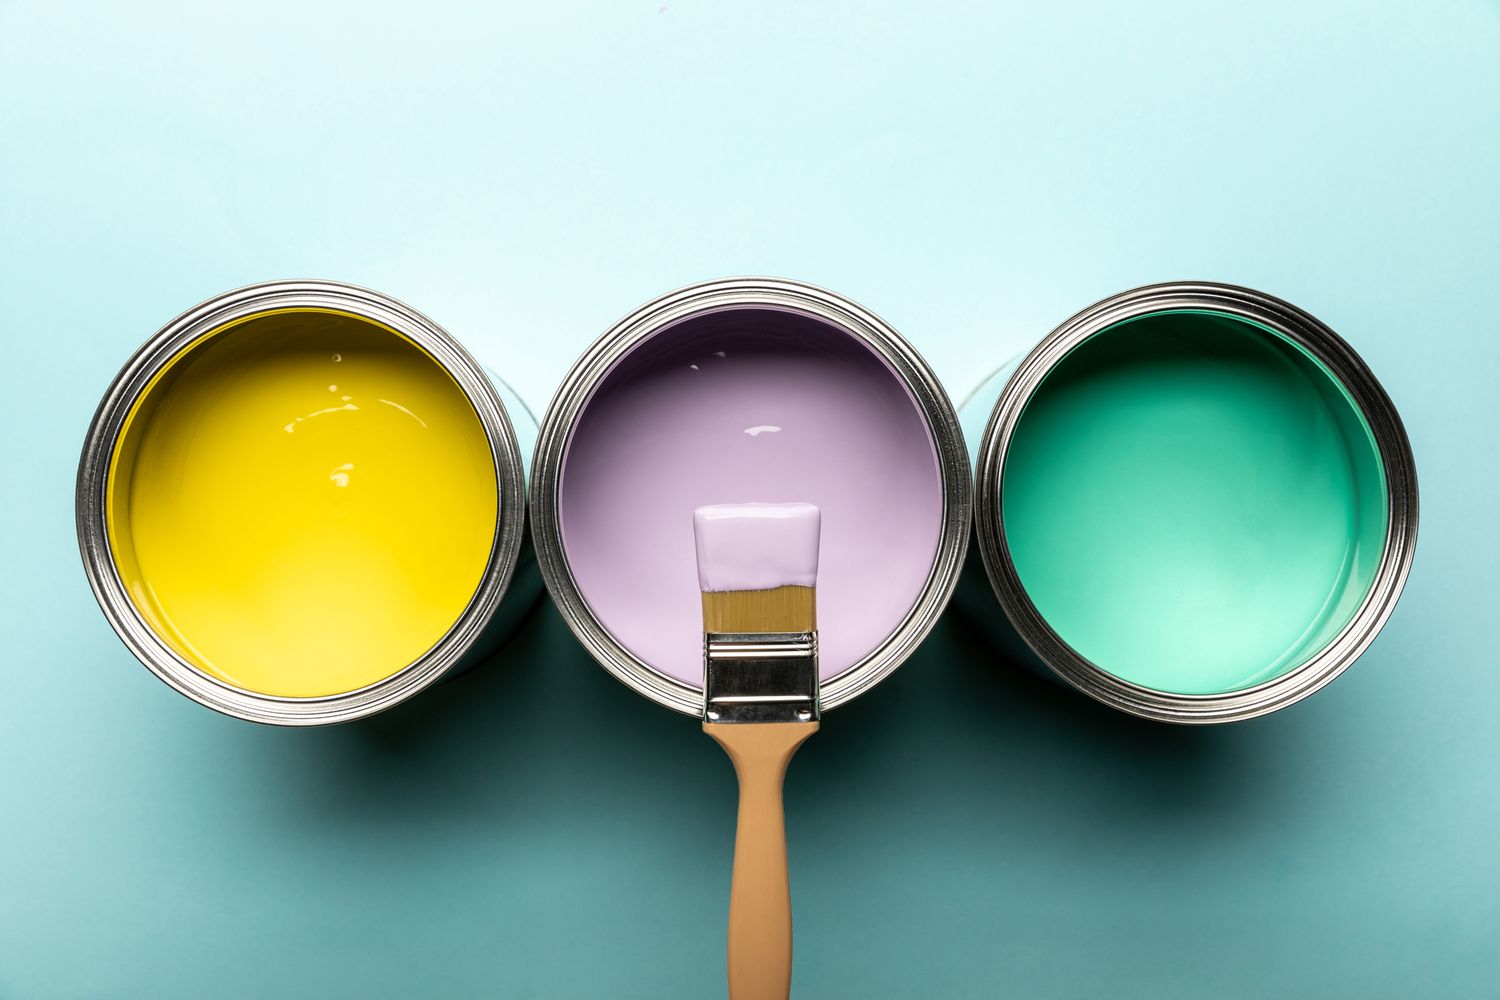 The Top 3 Paint Colors for the Interior and Exterior of Your Home